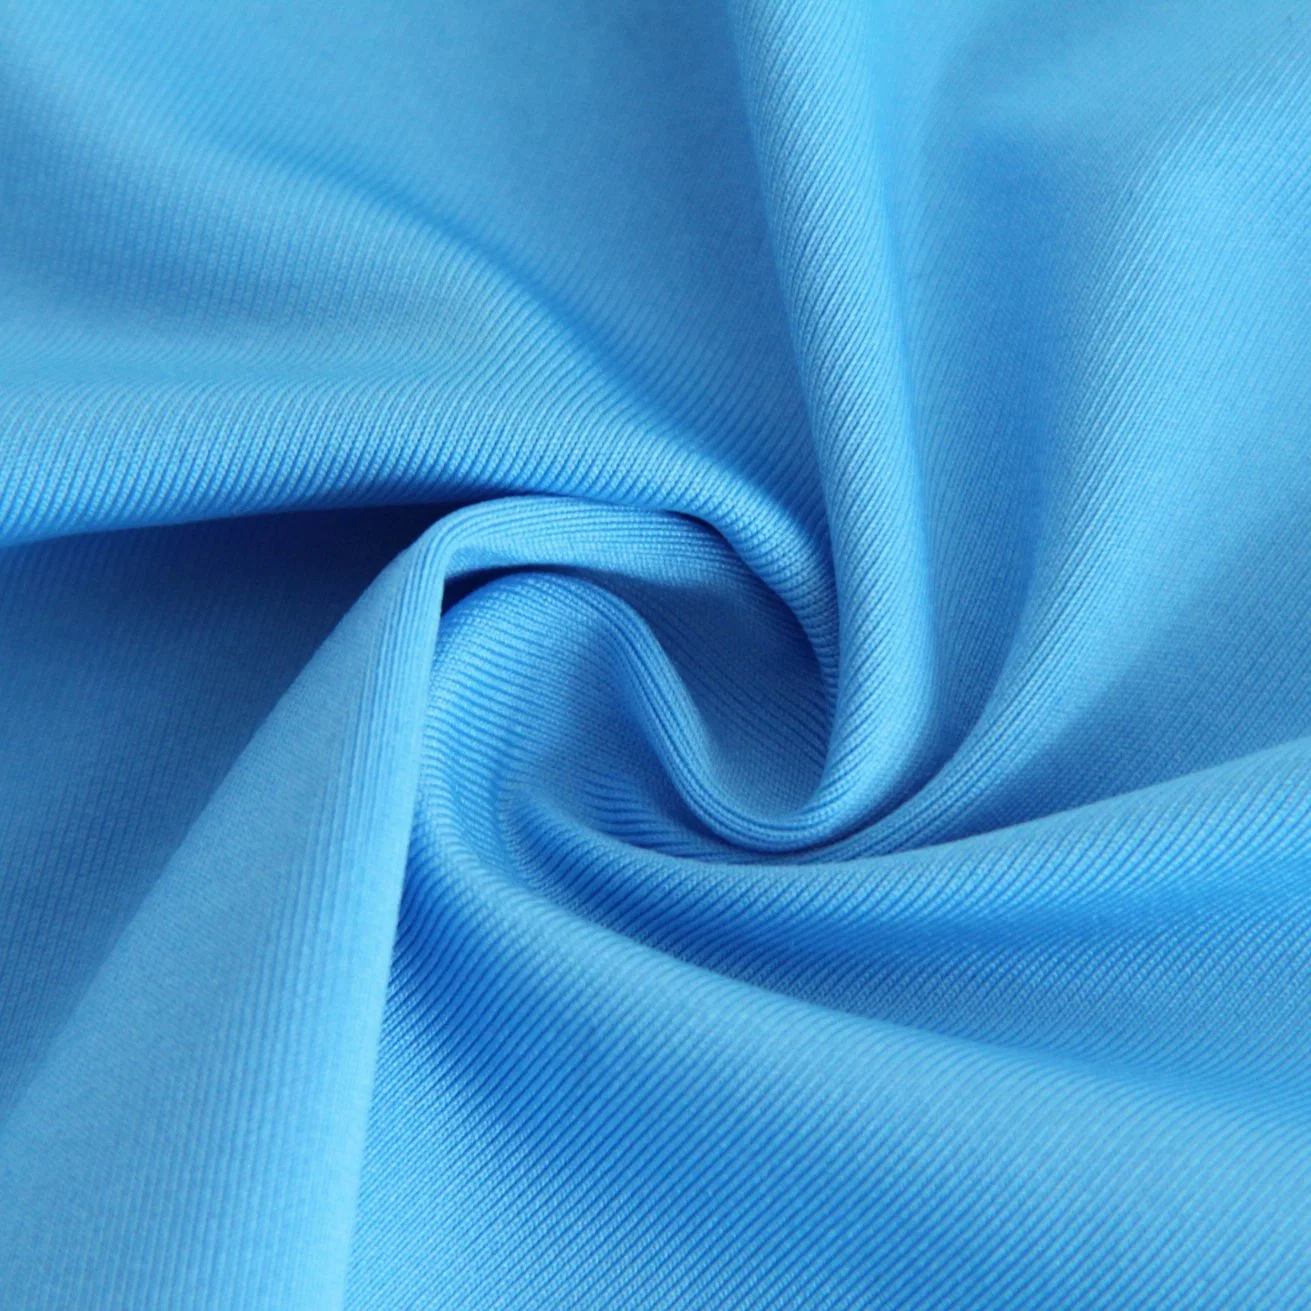 Polyester/Spandex Jersey Fabric with Elastic for Sportswear/Legging/T-Shirt